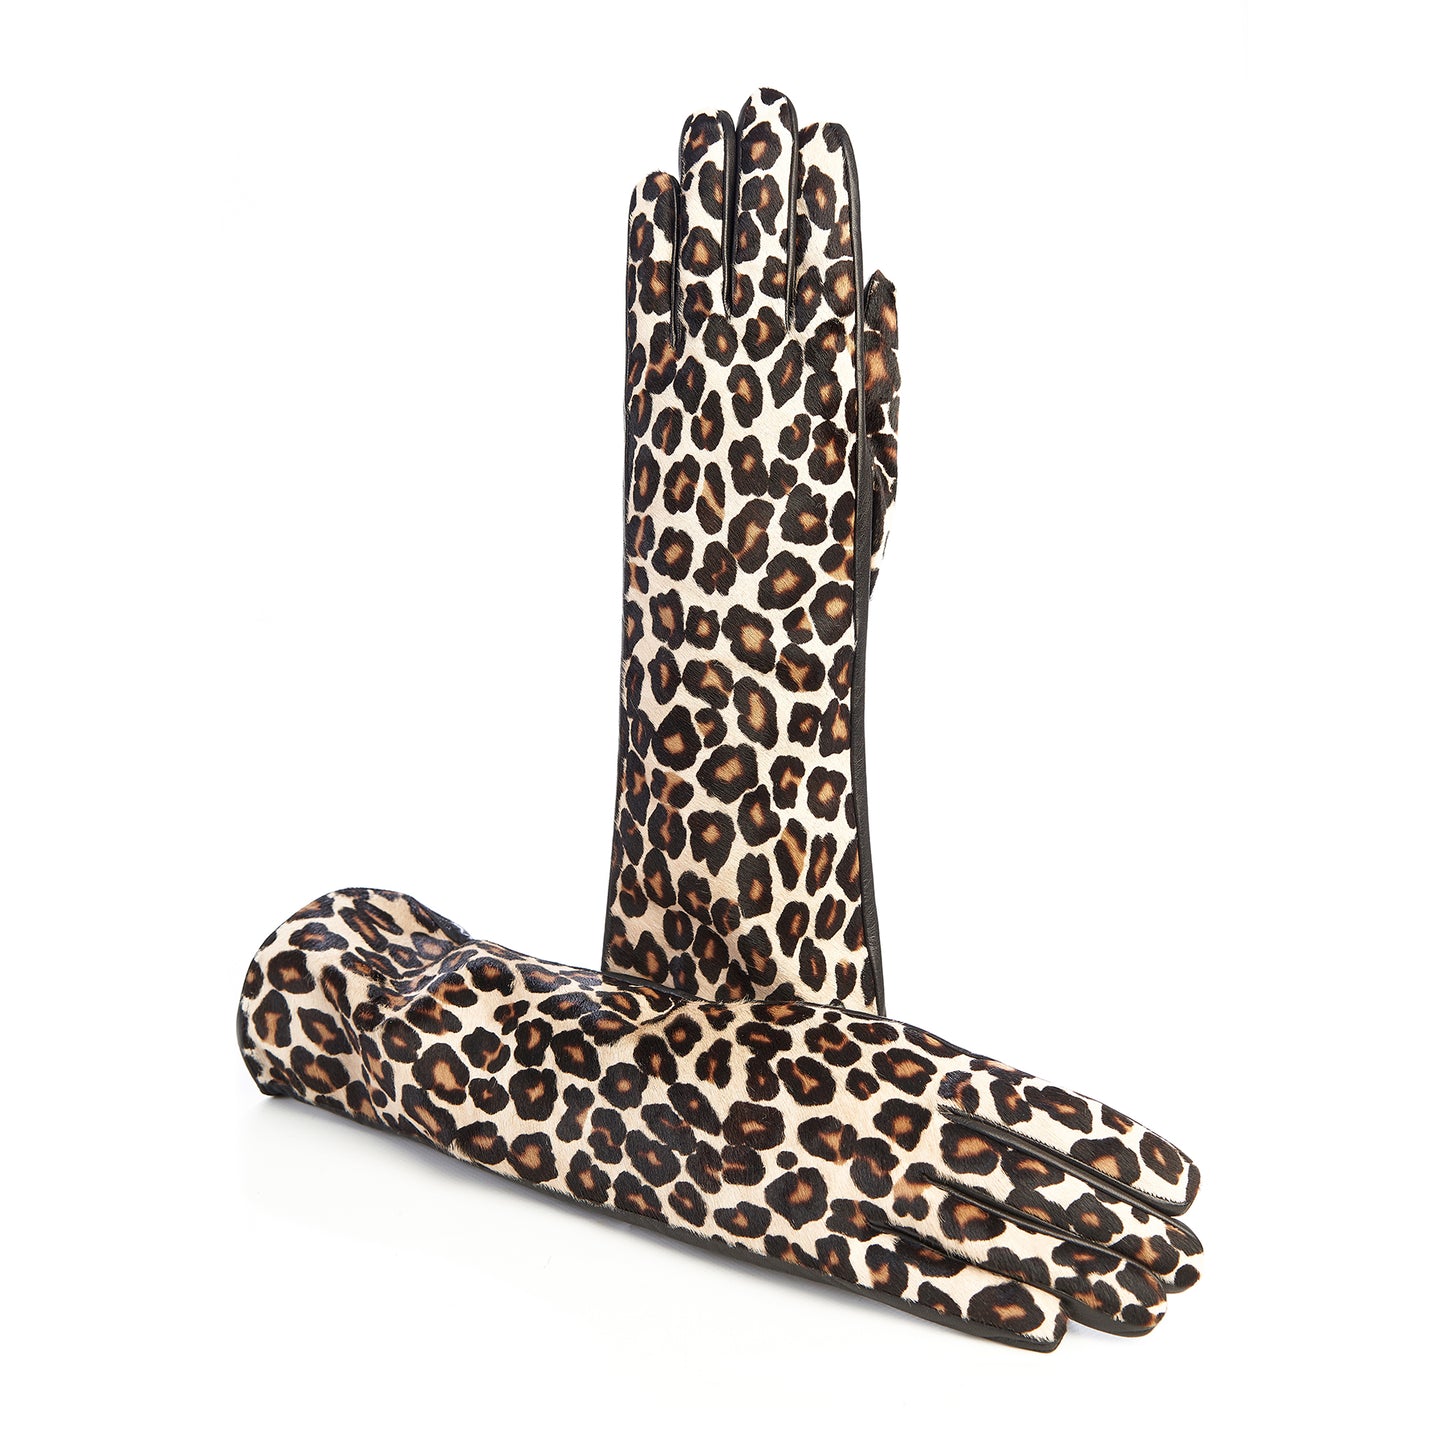 Ladies' leather gloves with white leo printed calfskin top details